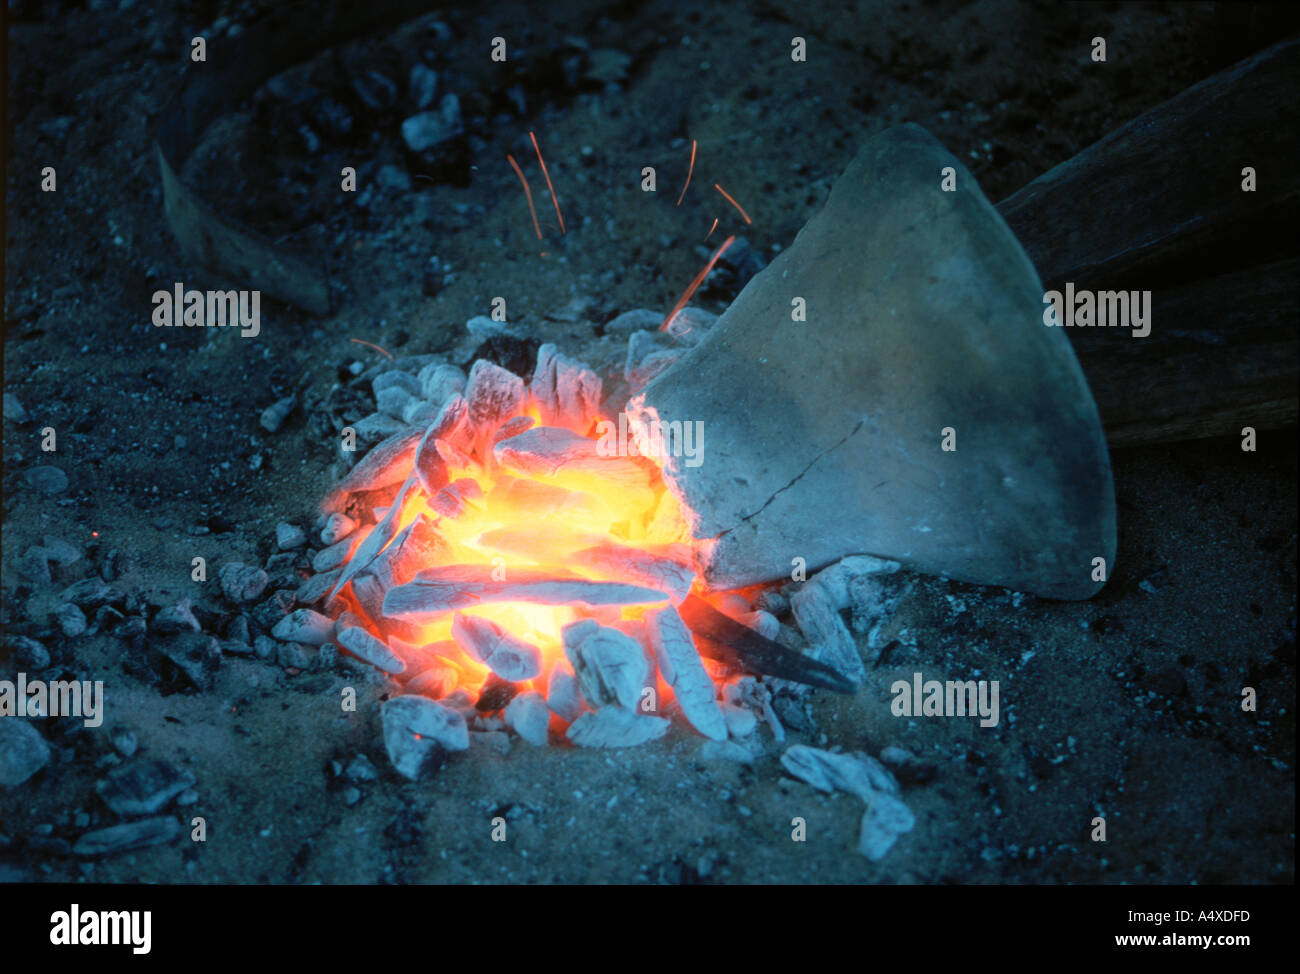 Hot fire with bellows for working iron Stock Photo